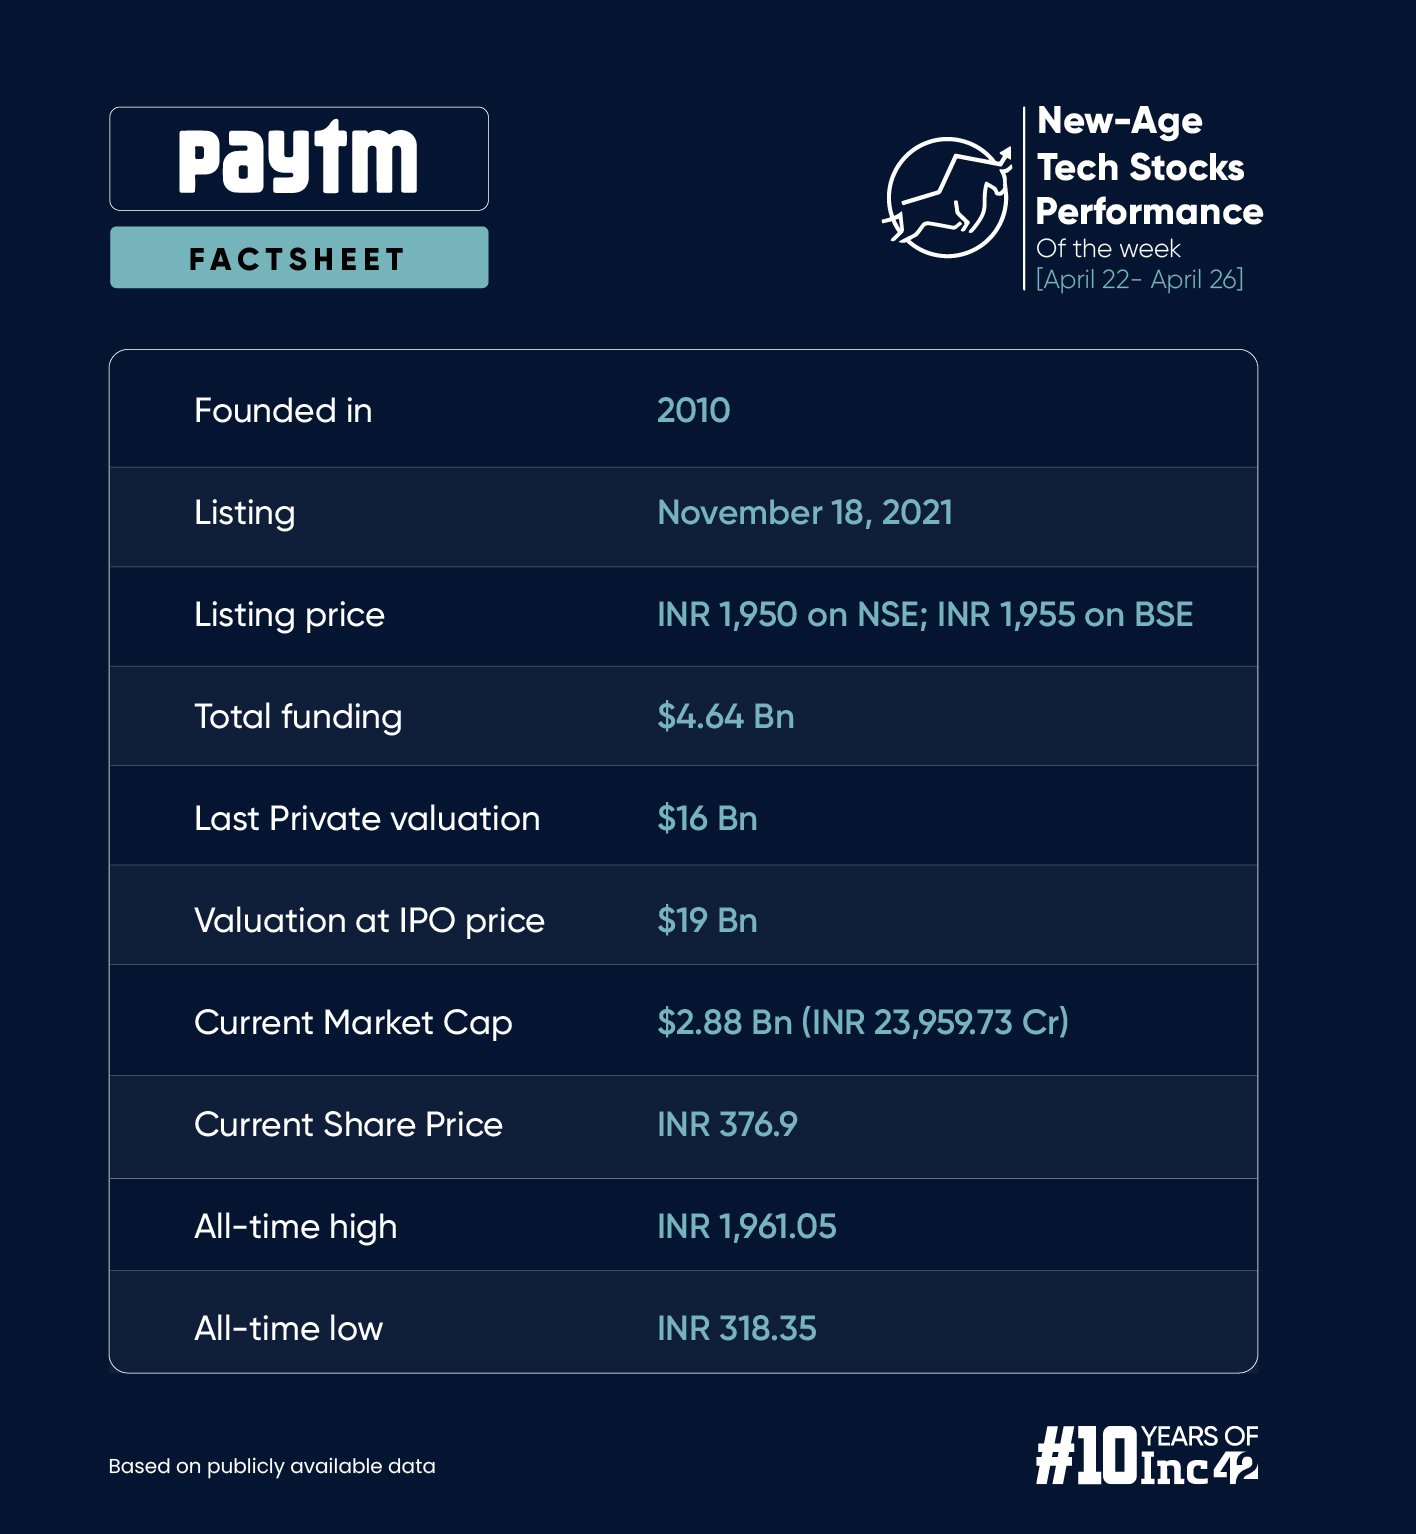 Paytm’s New Launch